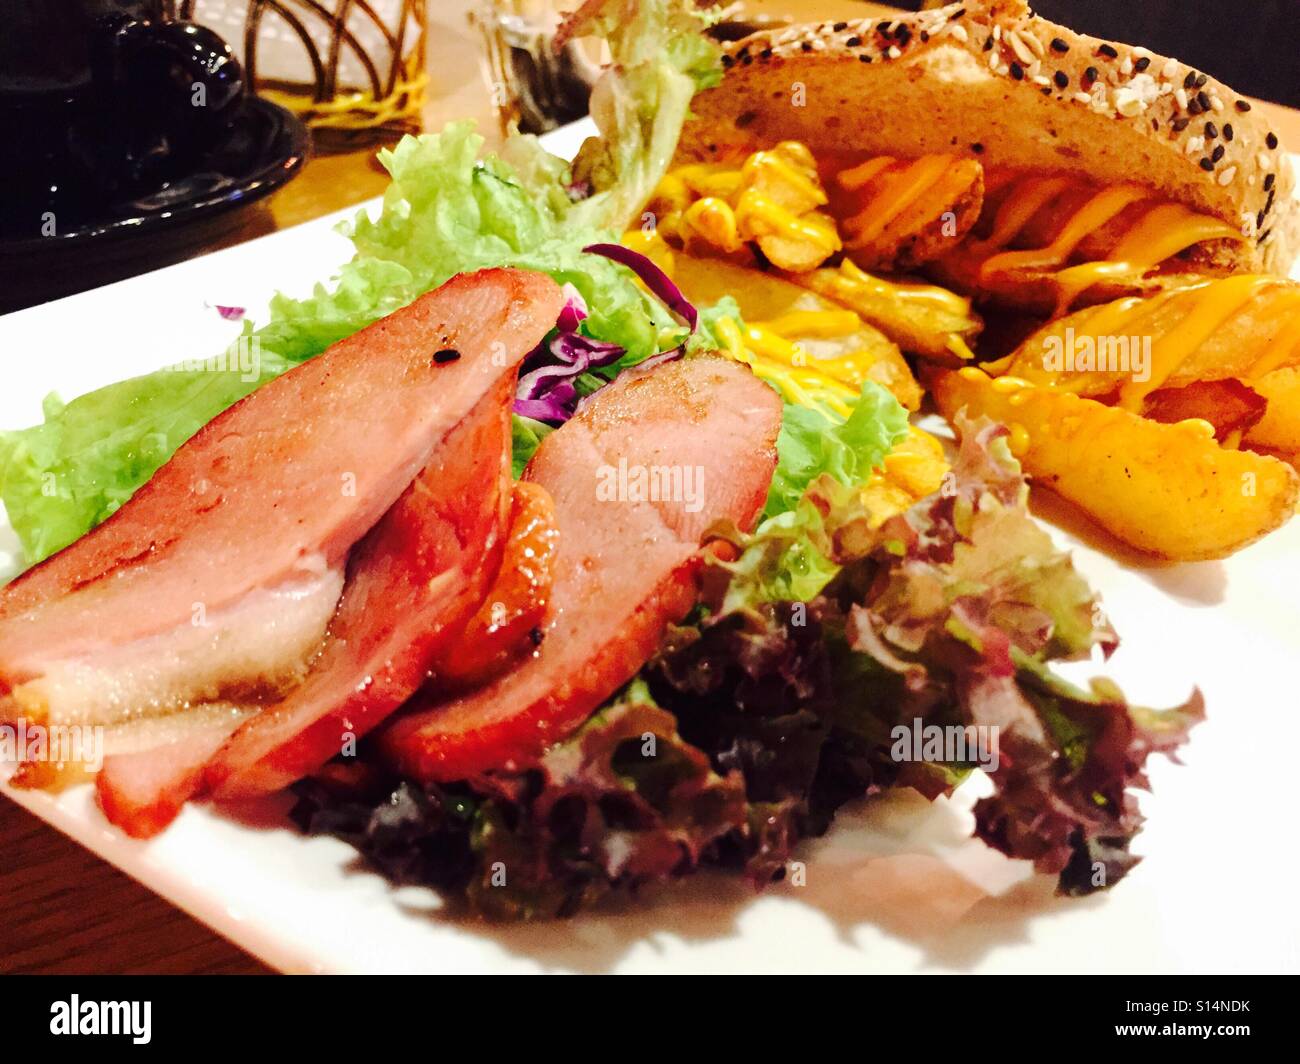 Sliced Duck meat with potato wedges Stock Photo